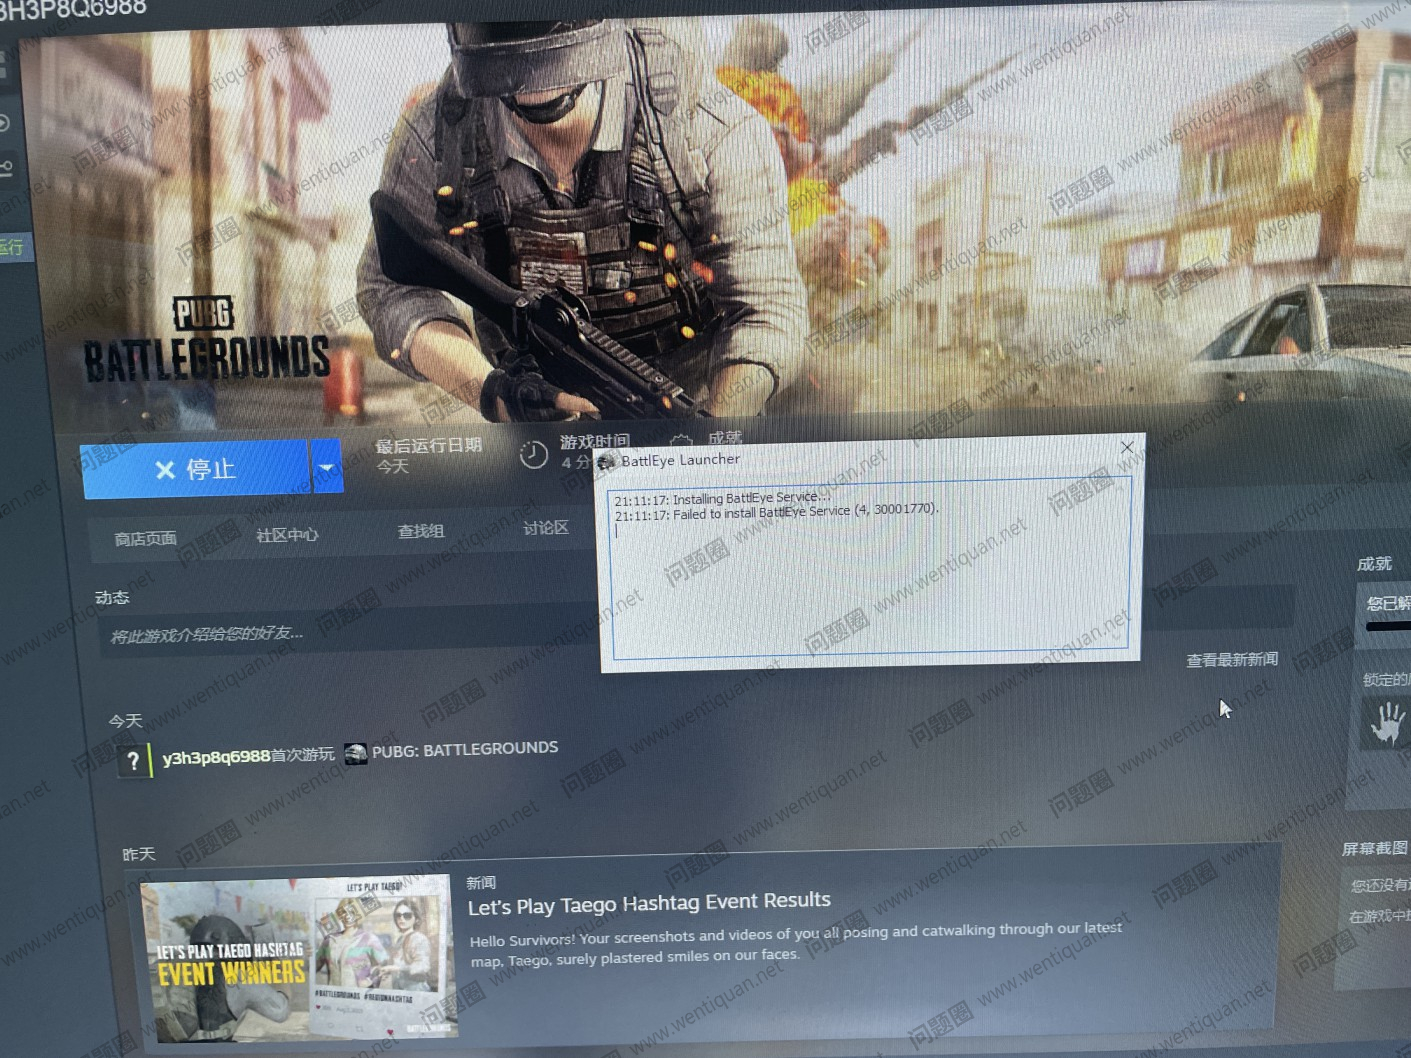 Download failed because the resources could be found pubg фото 32